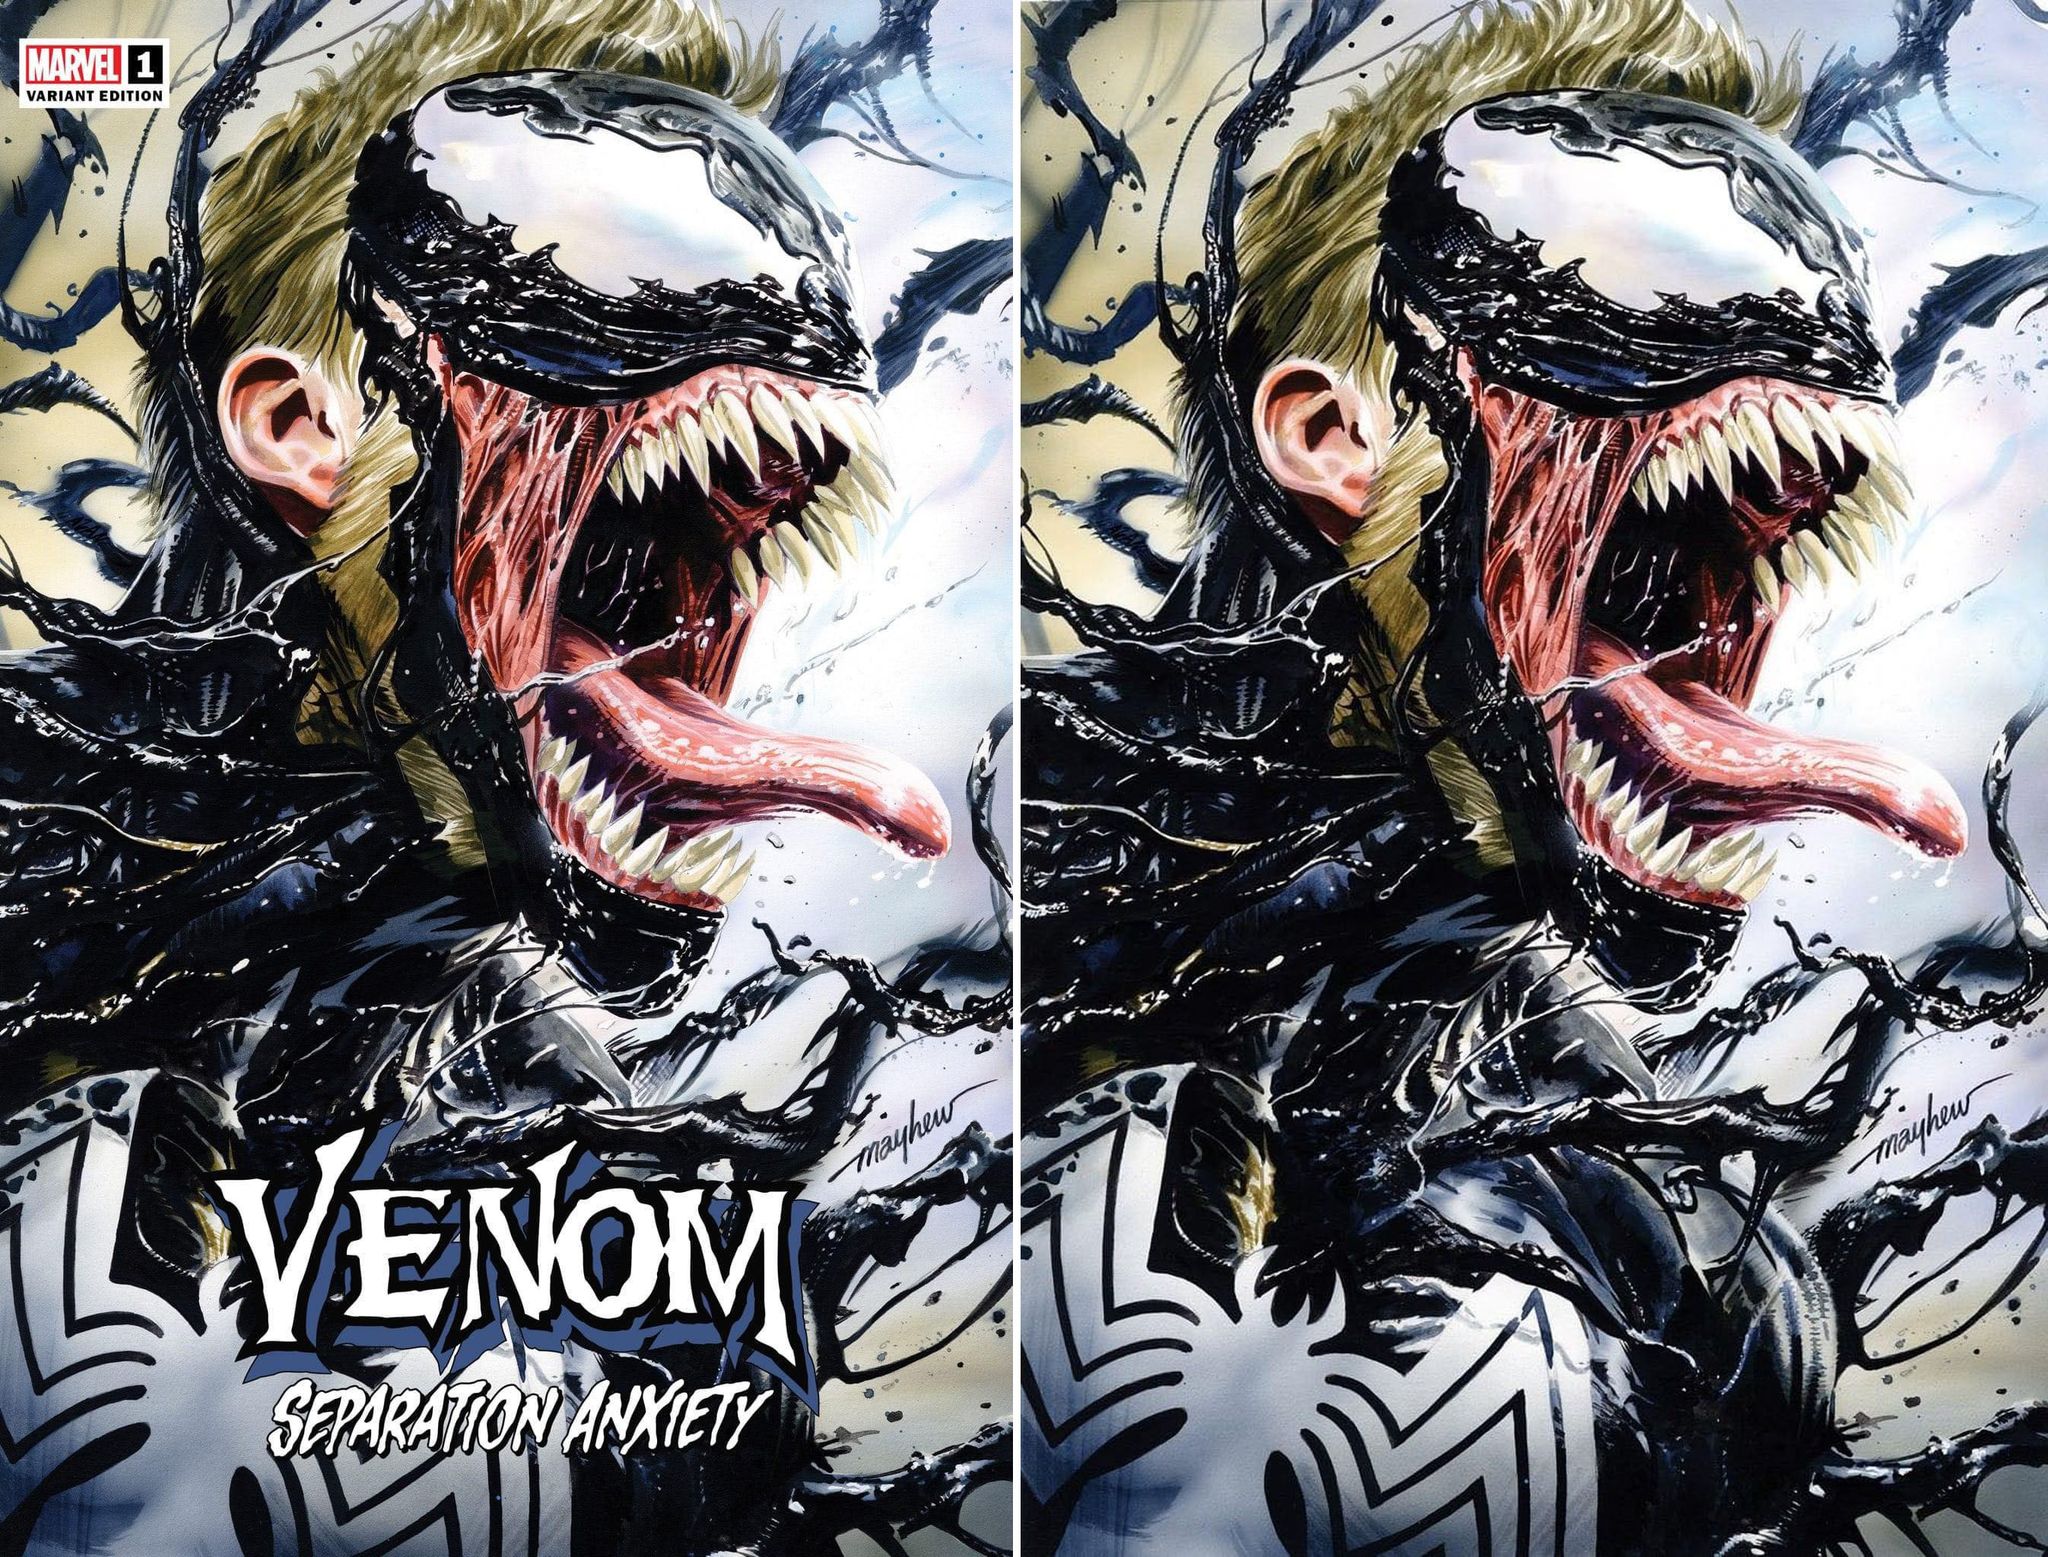 VENOM: SEPARATION ANXIETY #1 MIKE MAYHEW EXCLUSIVE VARIANT OPTIONS 05-15-24